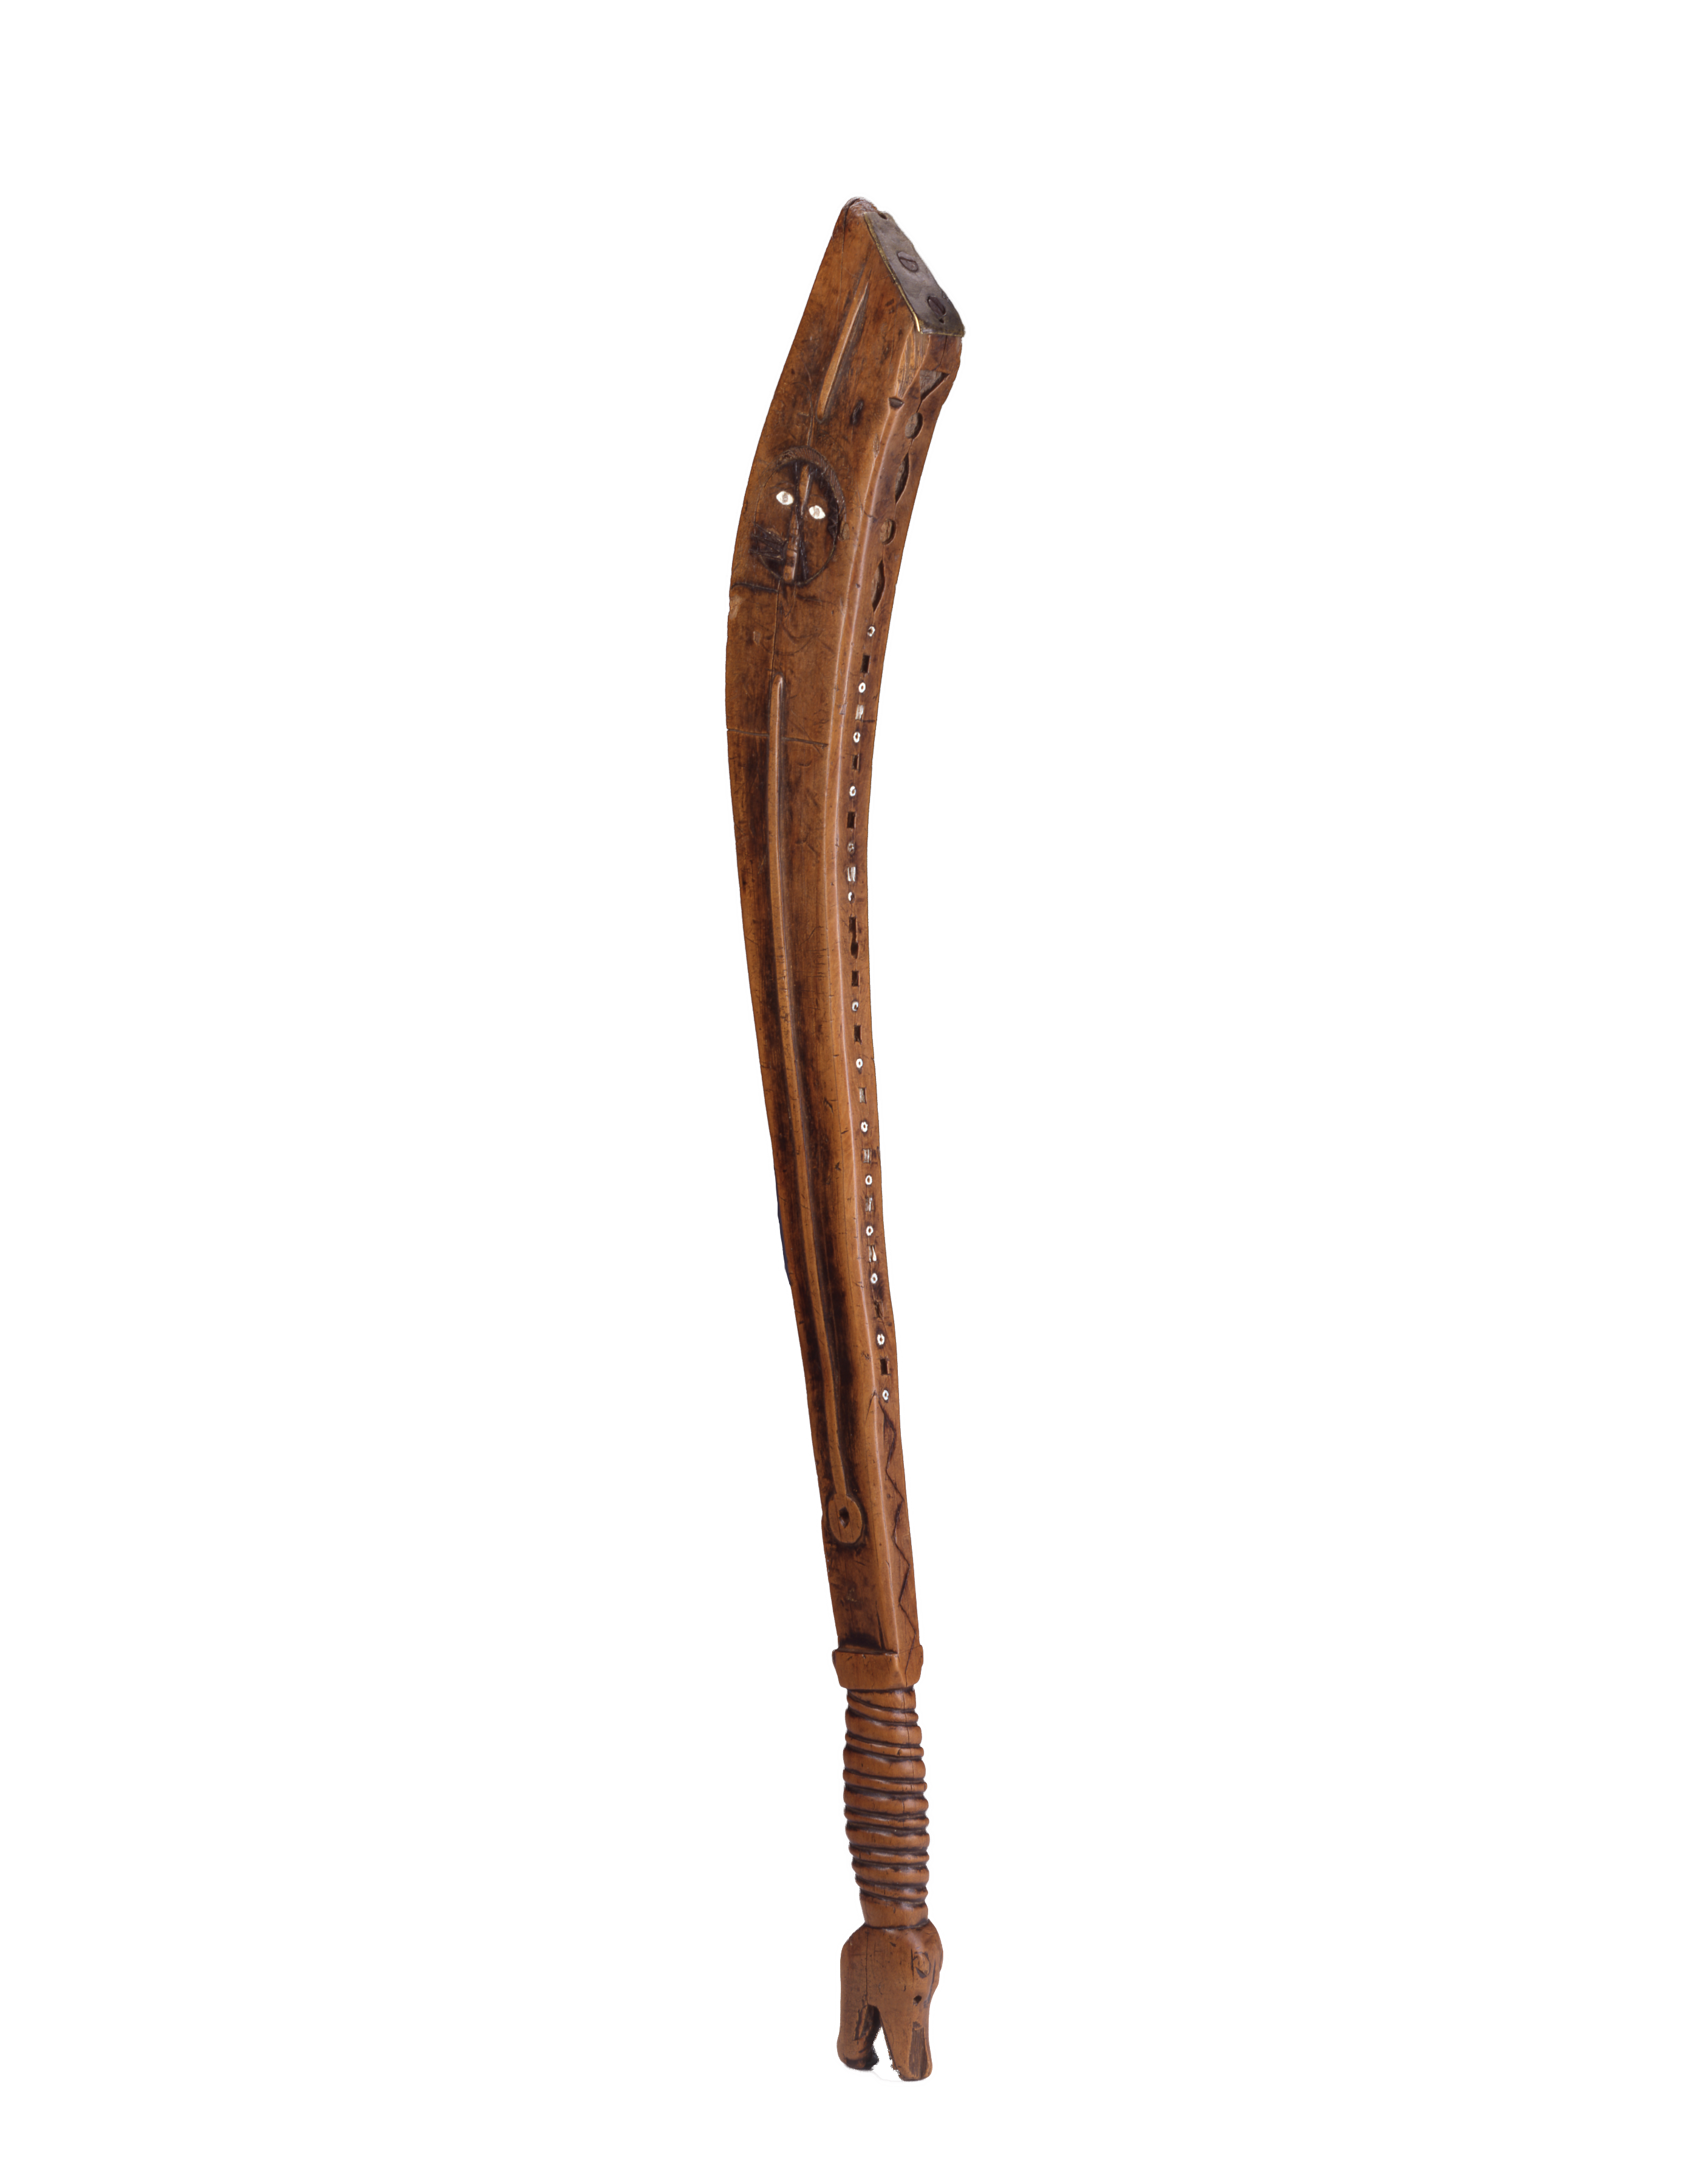 A 17th century, 24 inch long, wooden war club featuring a wood coiled handle grip at the base and the face of a Native American warrior with piercing white eyes at the upper end of the shaft.